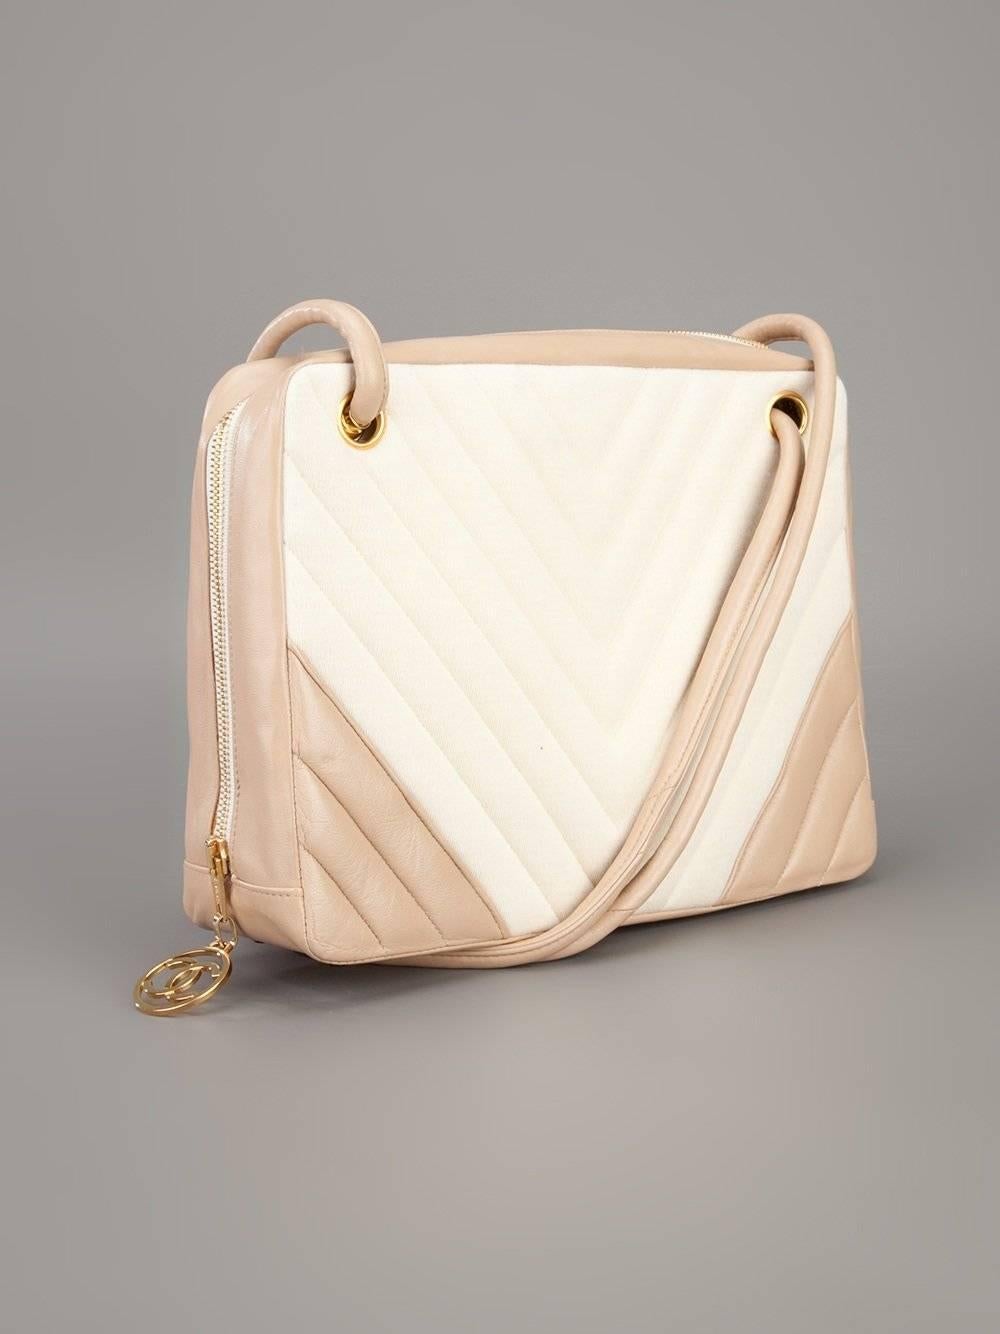 Beautiful two-tone Chanel bag in cream wool and nude pink leather, matelassé effect. The item is vintage, according to the code (1712681) it was produced between 1989-1991 and is in very good conditions. It features two handles, a zip closure with a